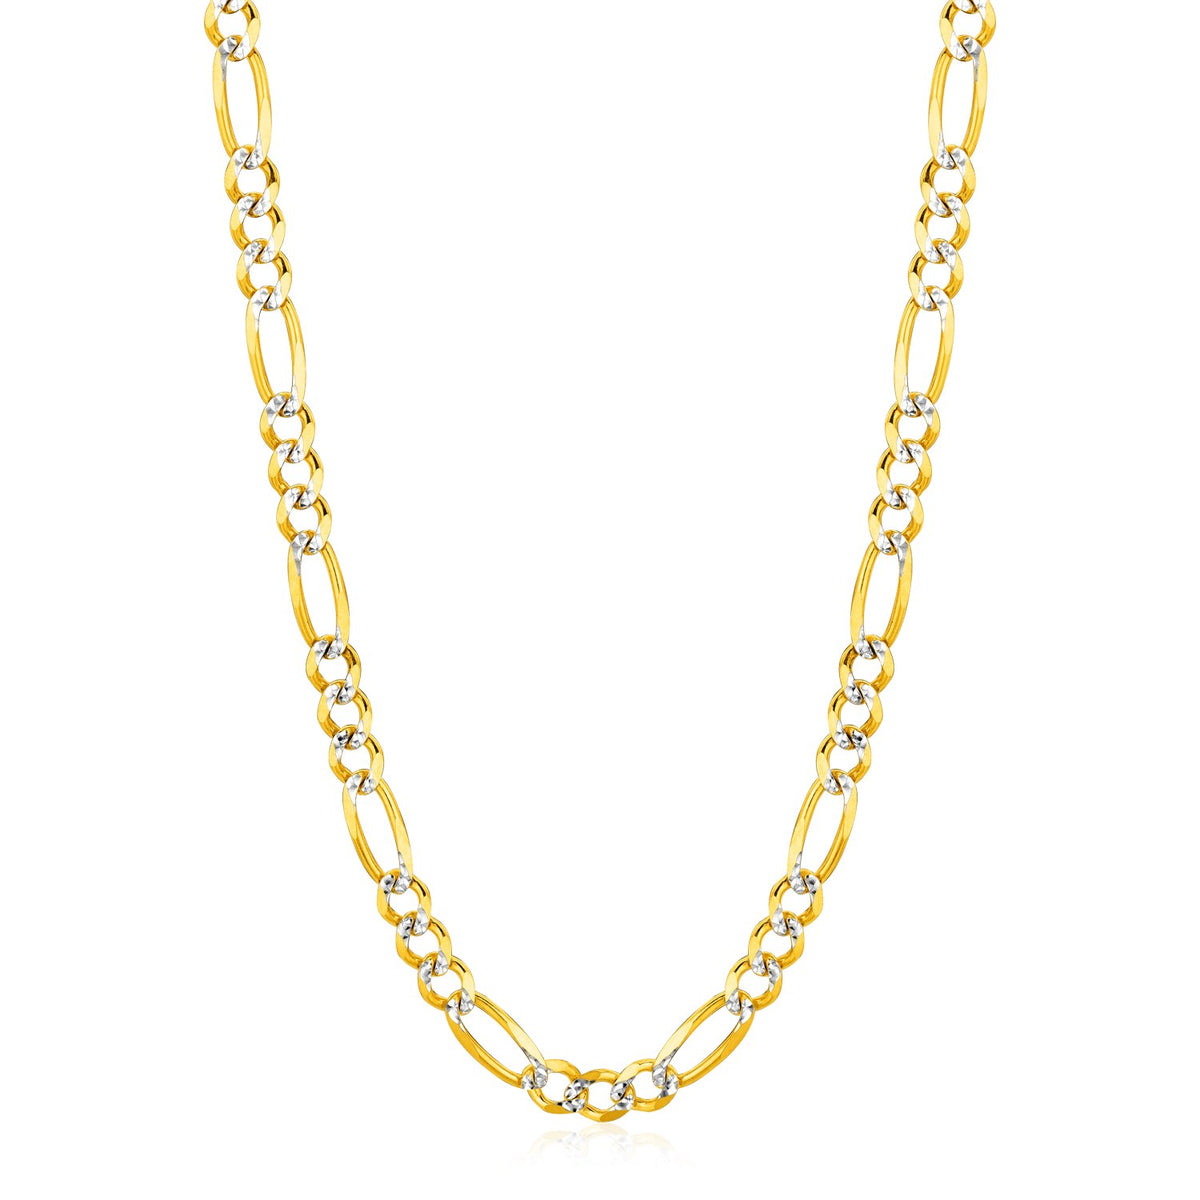 Solid Pave Figaro Chain - 14k Yellow Gold 5.90mm